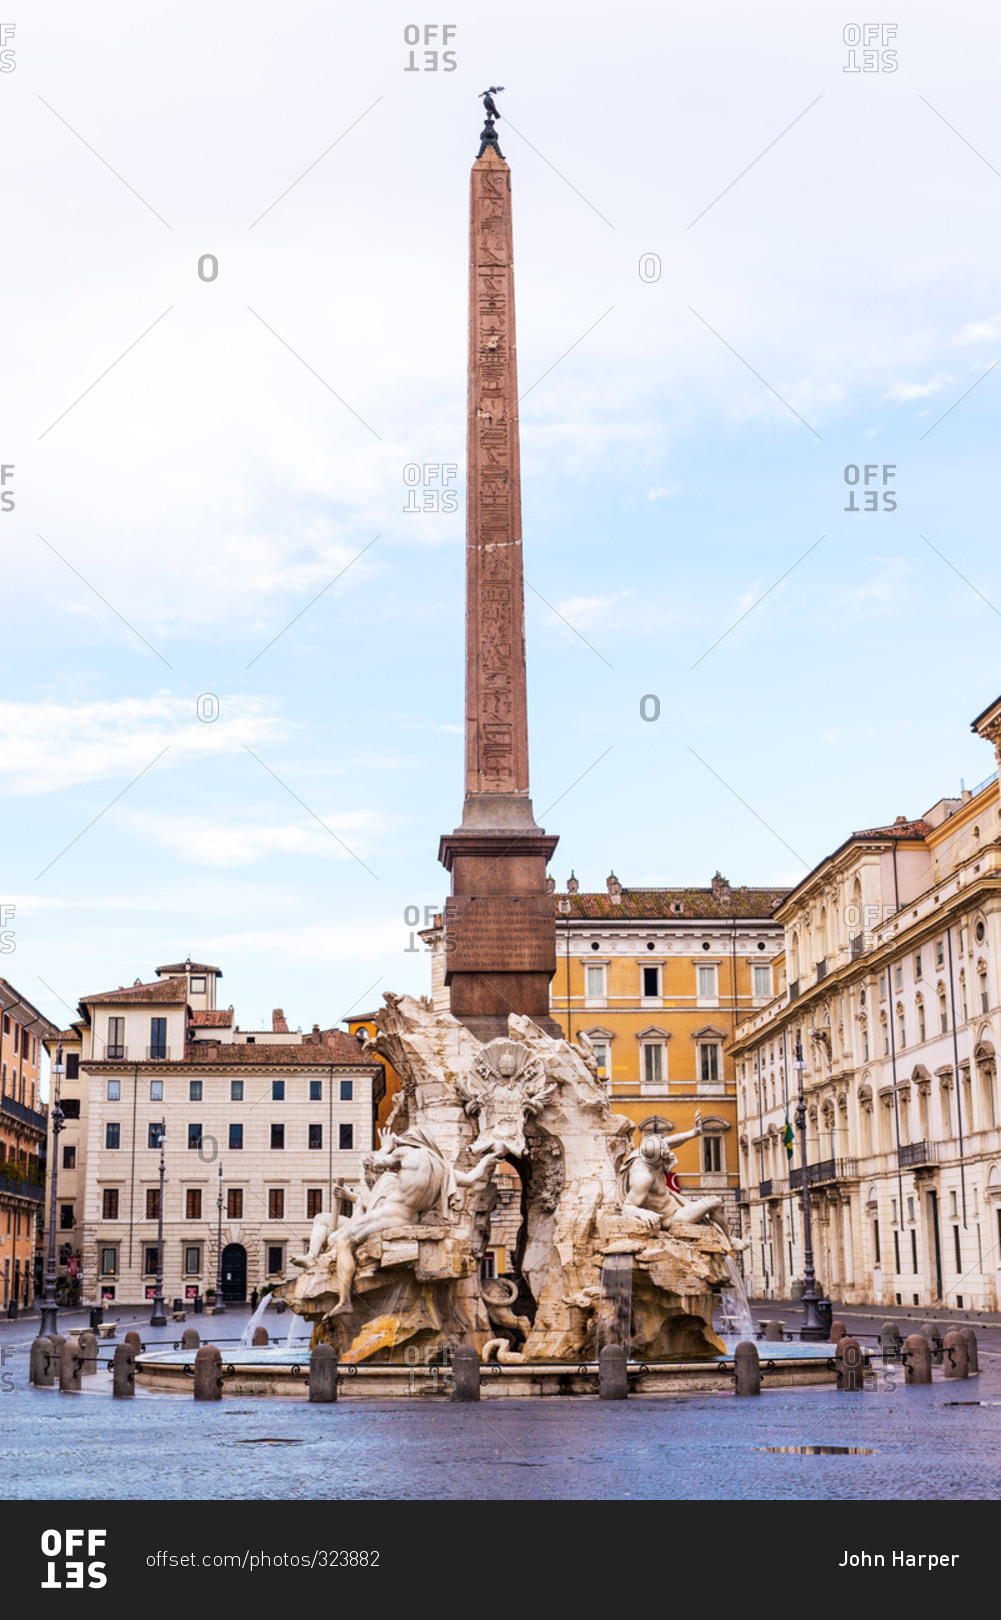 Fountain in Piazza Navona, Rome, Italy